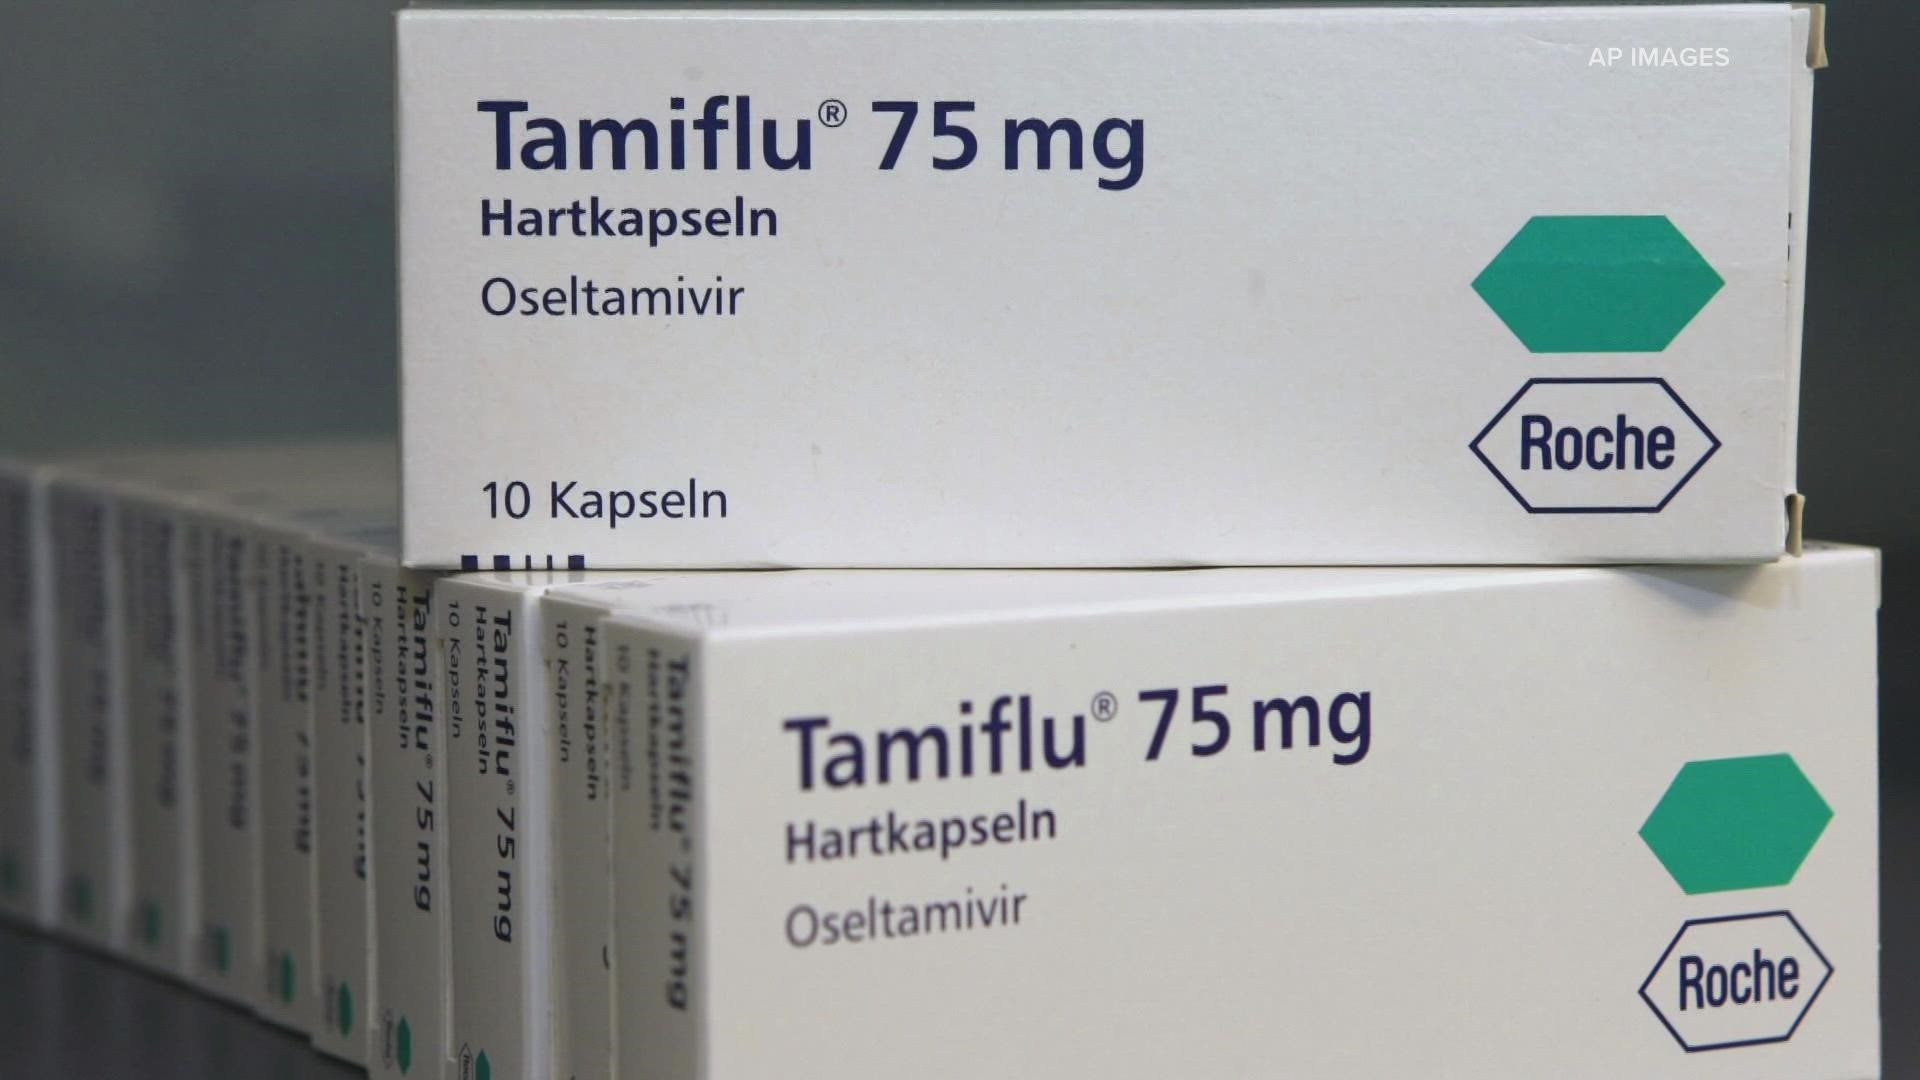 Staying small, independent and local may be your best short at getting flu treatments like Tamiflu, as popular retailers say they're temporarily out of the drug.